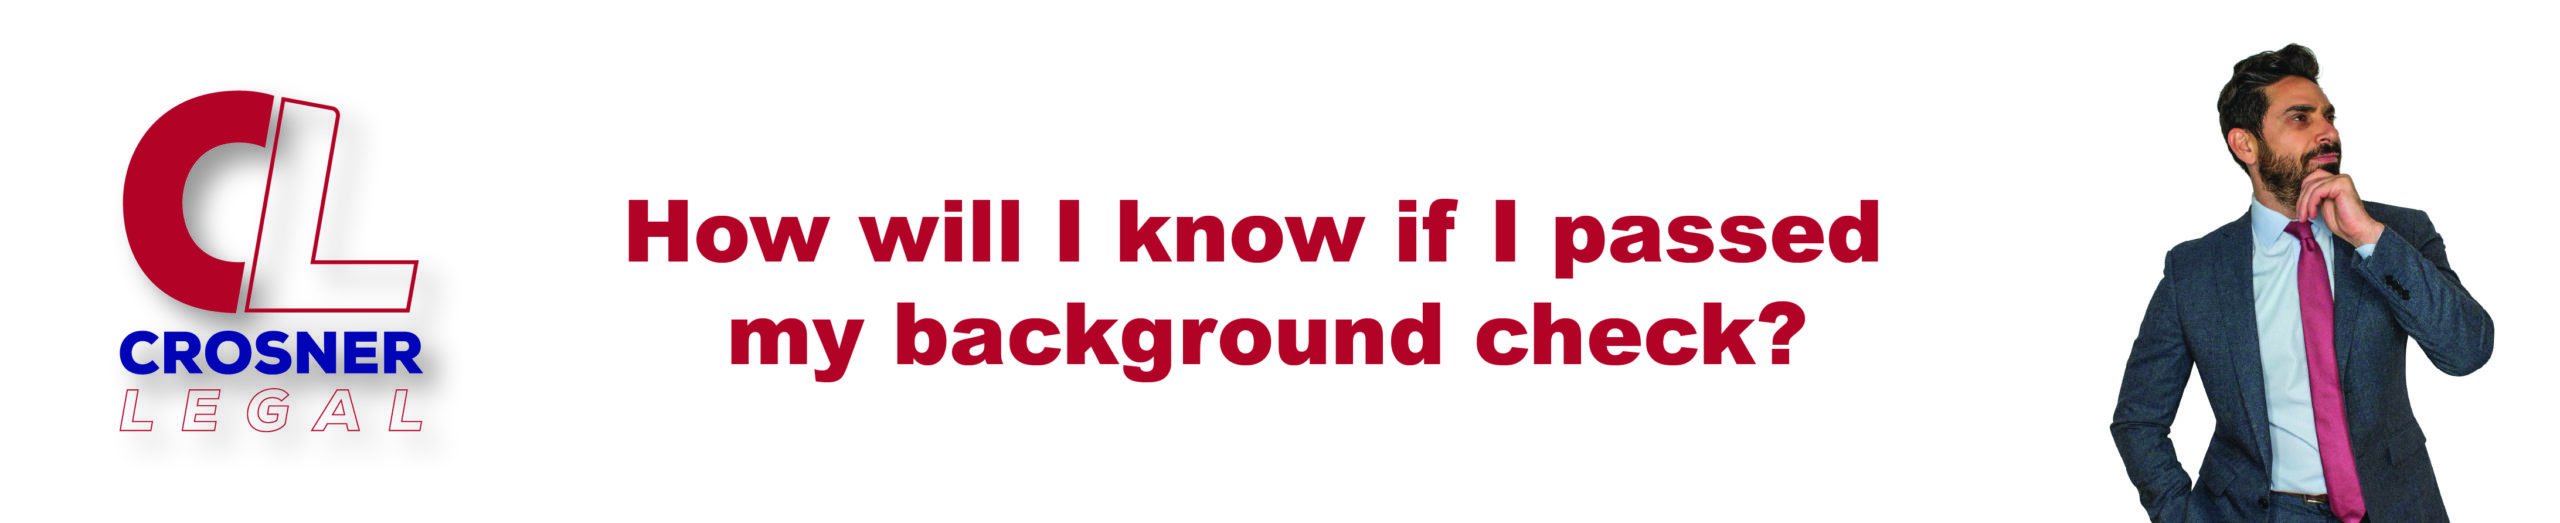 How will I know if I passed my background check?